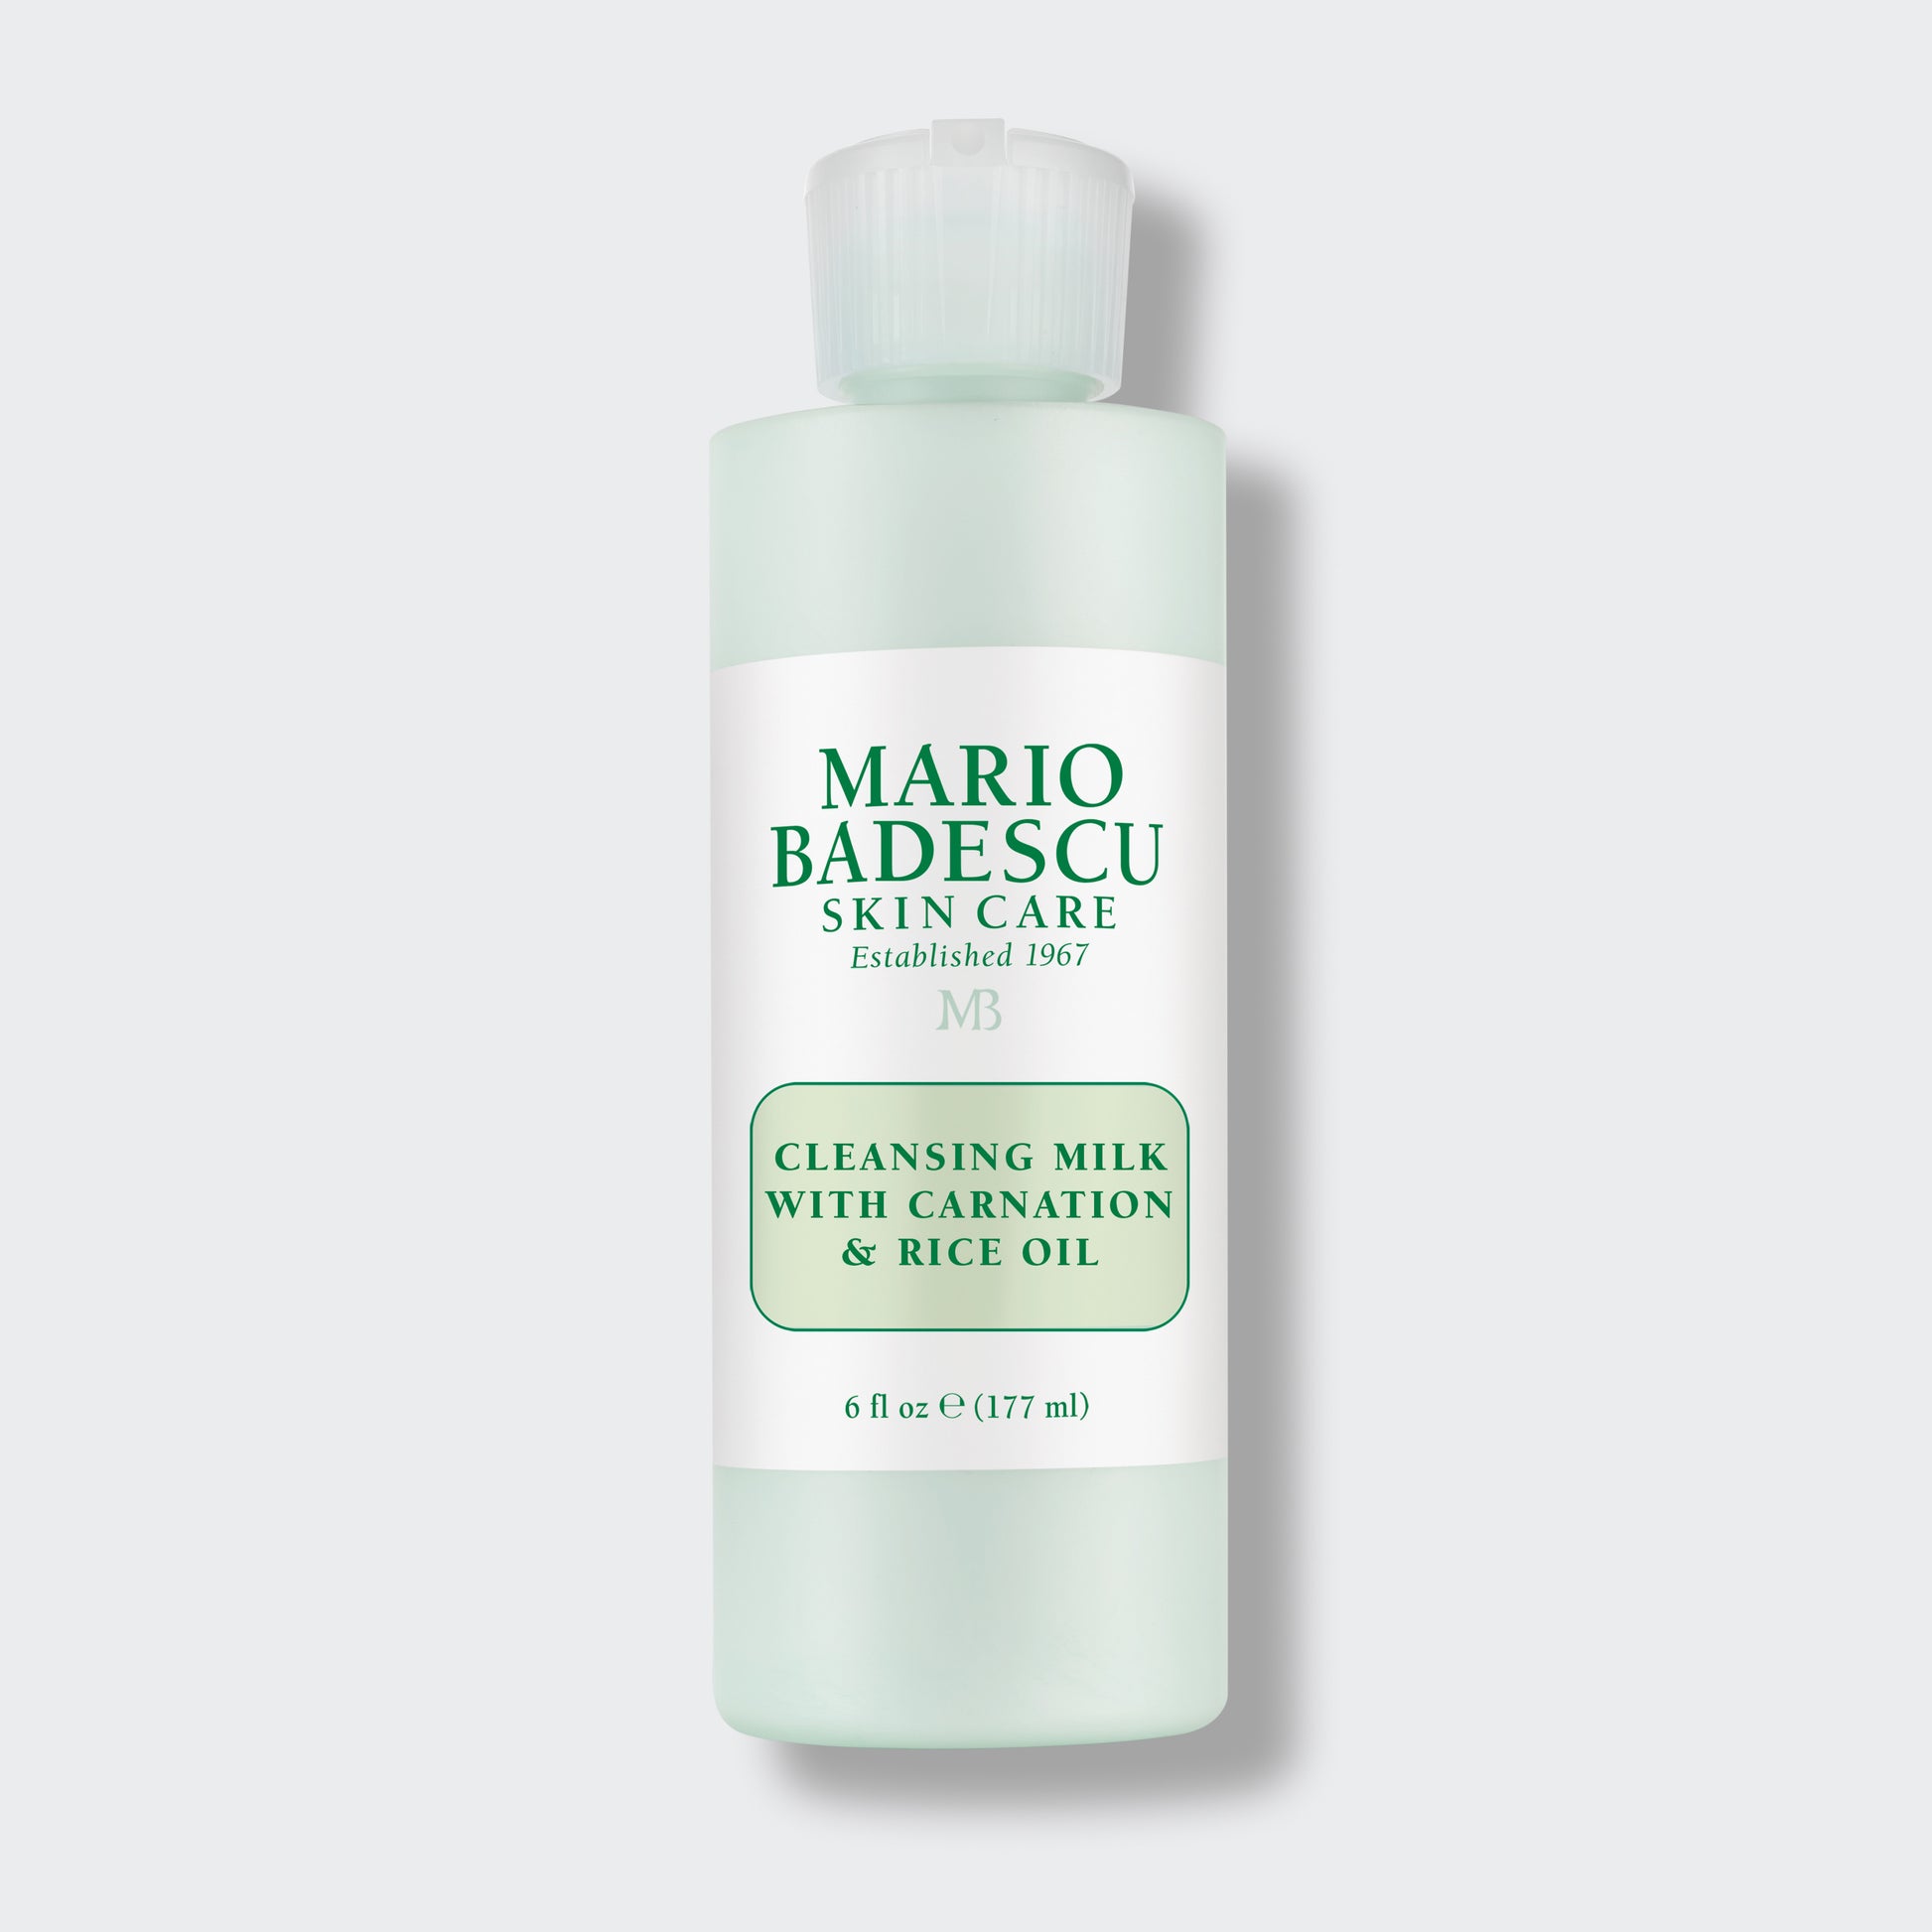 Mario Badescu Cleansing Milk with Carnation & Rice Oil 